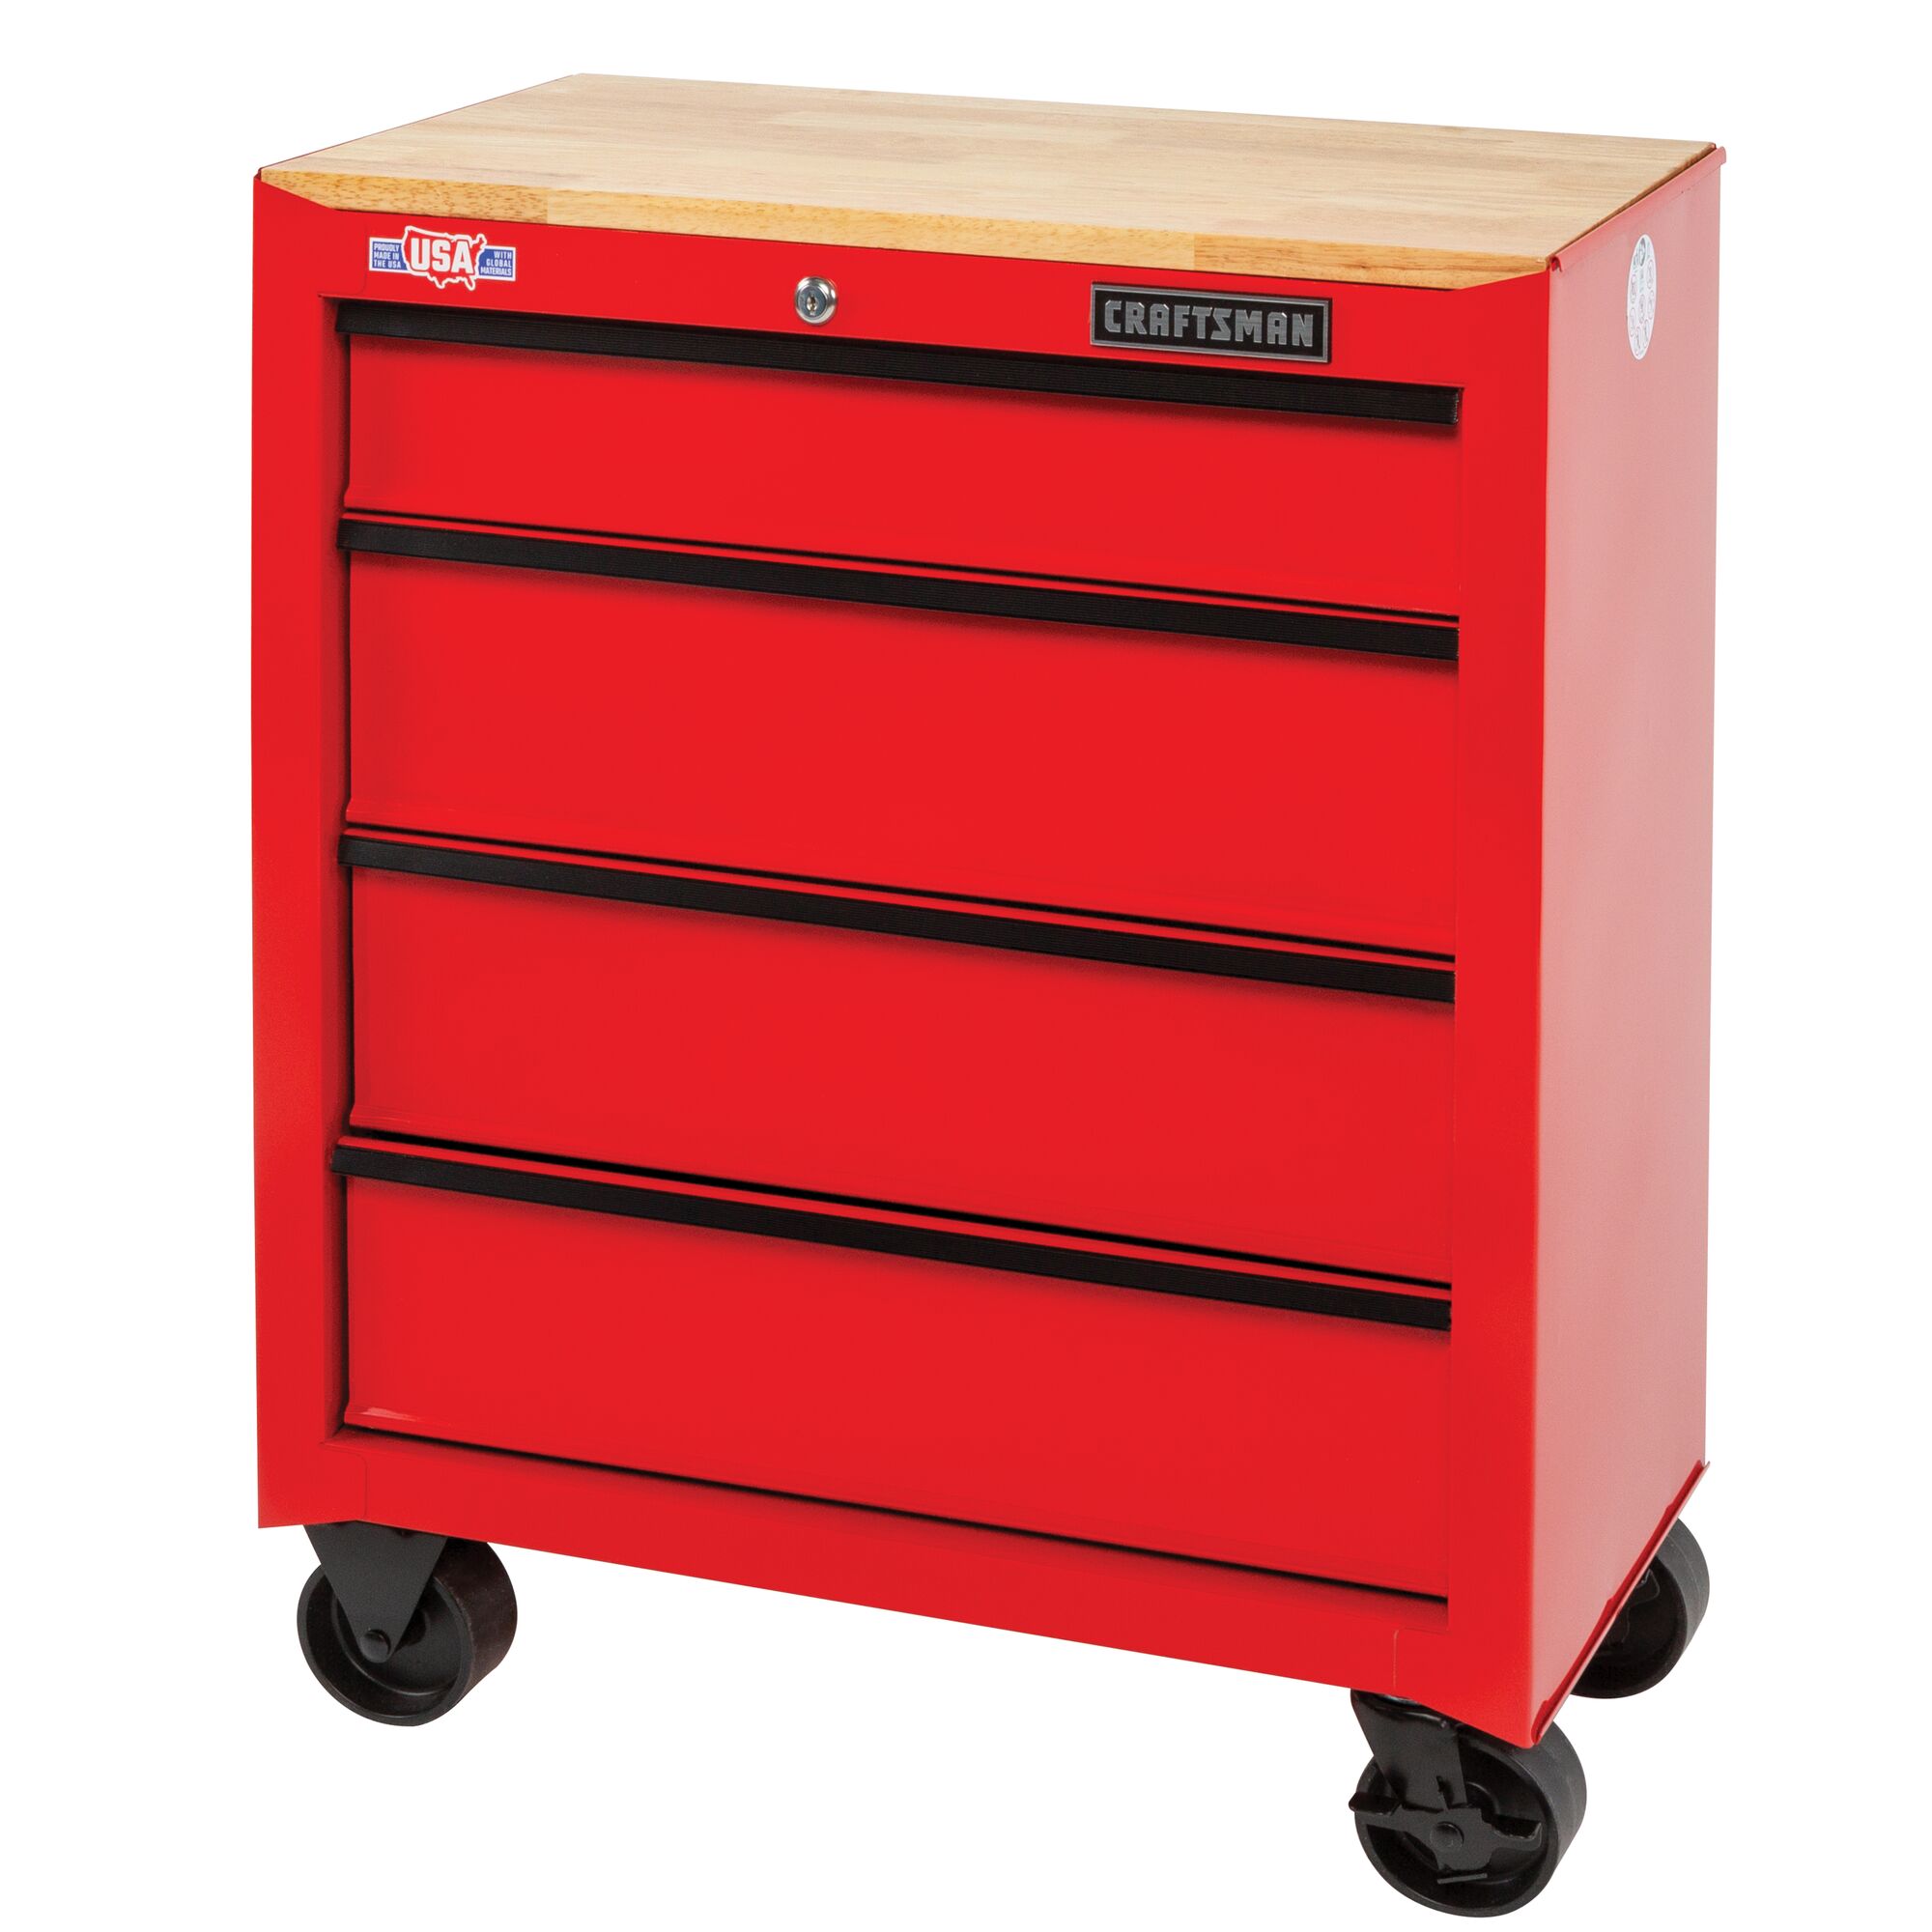 CRAFTSMAN 26.2-in L x 32.5-in H 4-Drawers Rolling Red Wood Work Bench